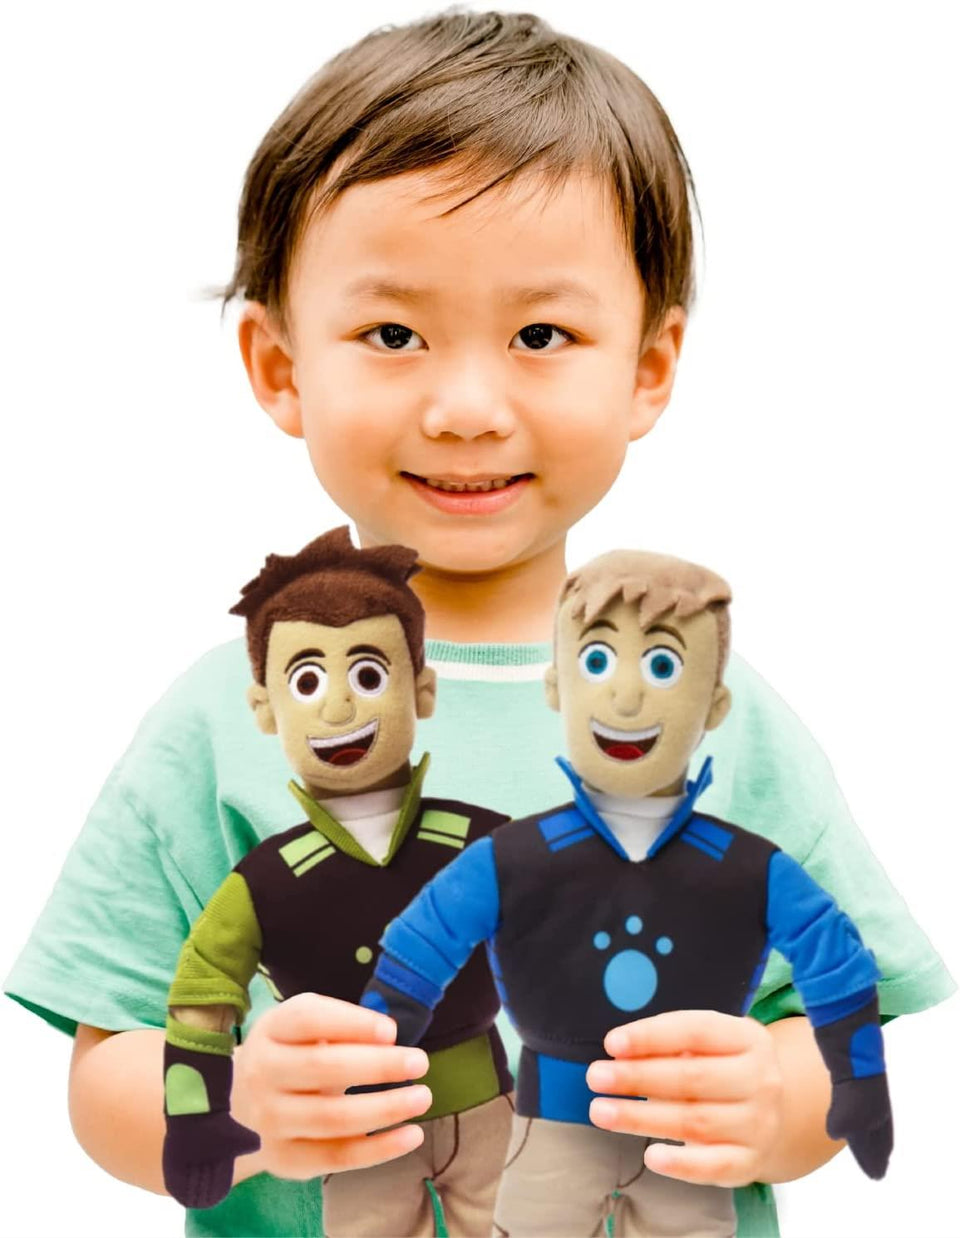 Wild Kratts Chris & Martin Plush Toy Dolls Set Power Suits TV Character Mighty Mojo